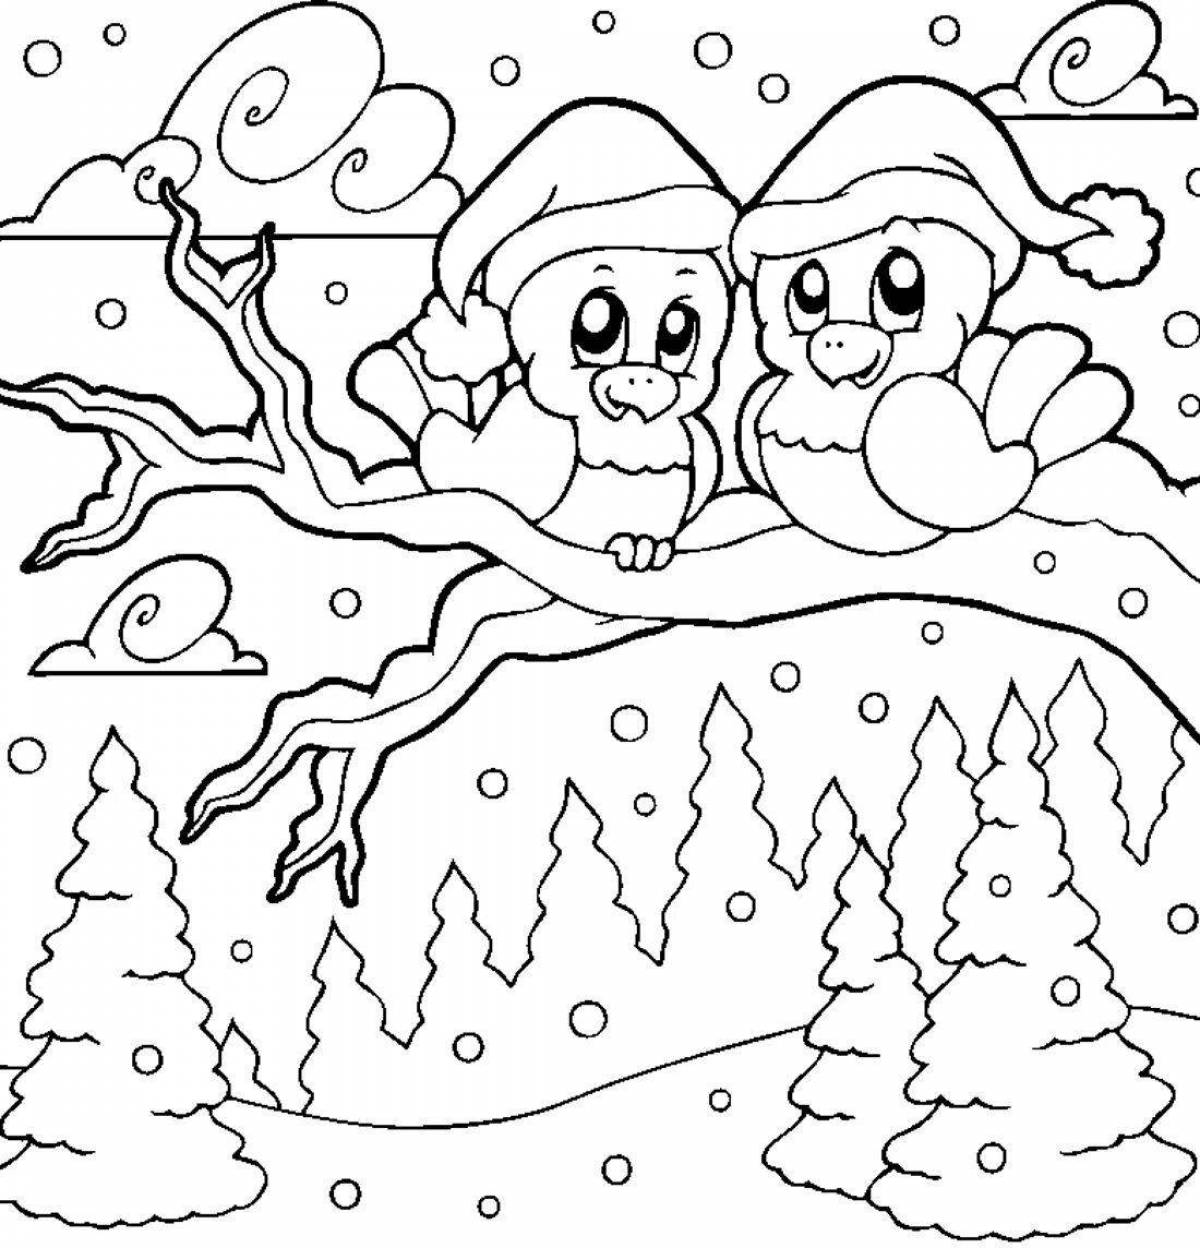 Cute winter coloring for kids